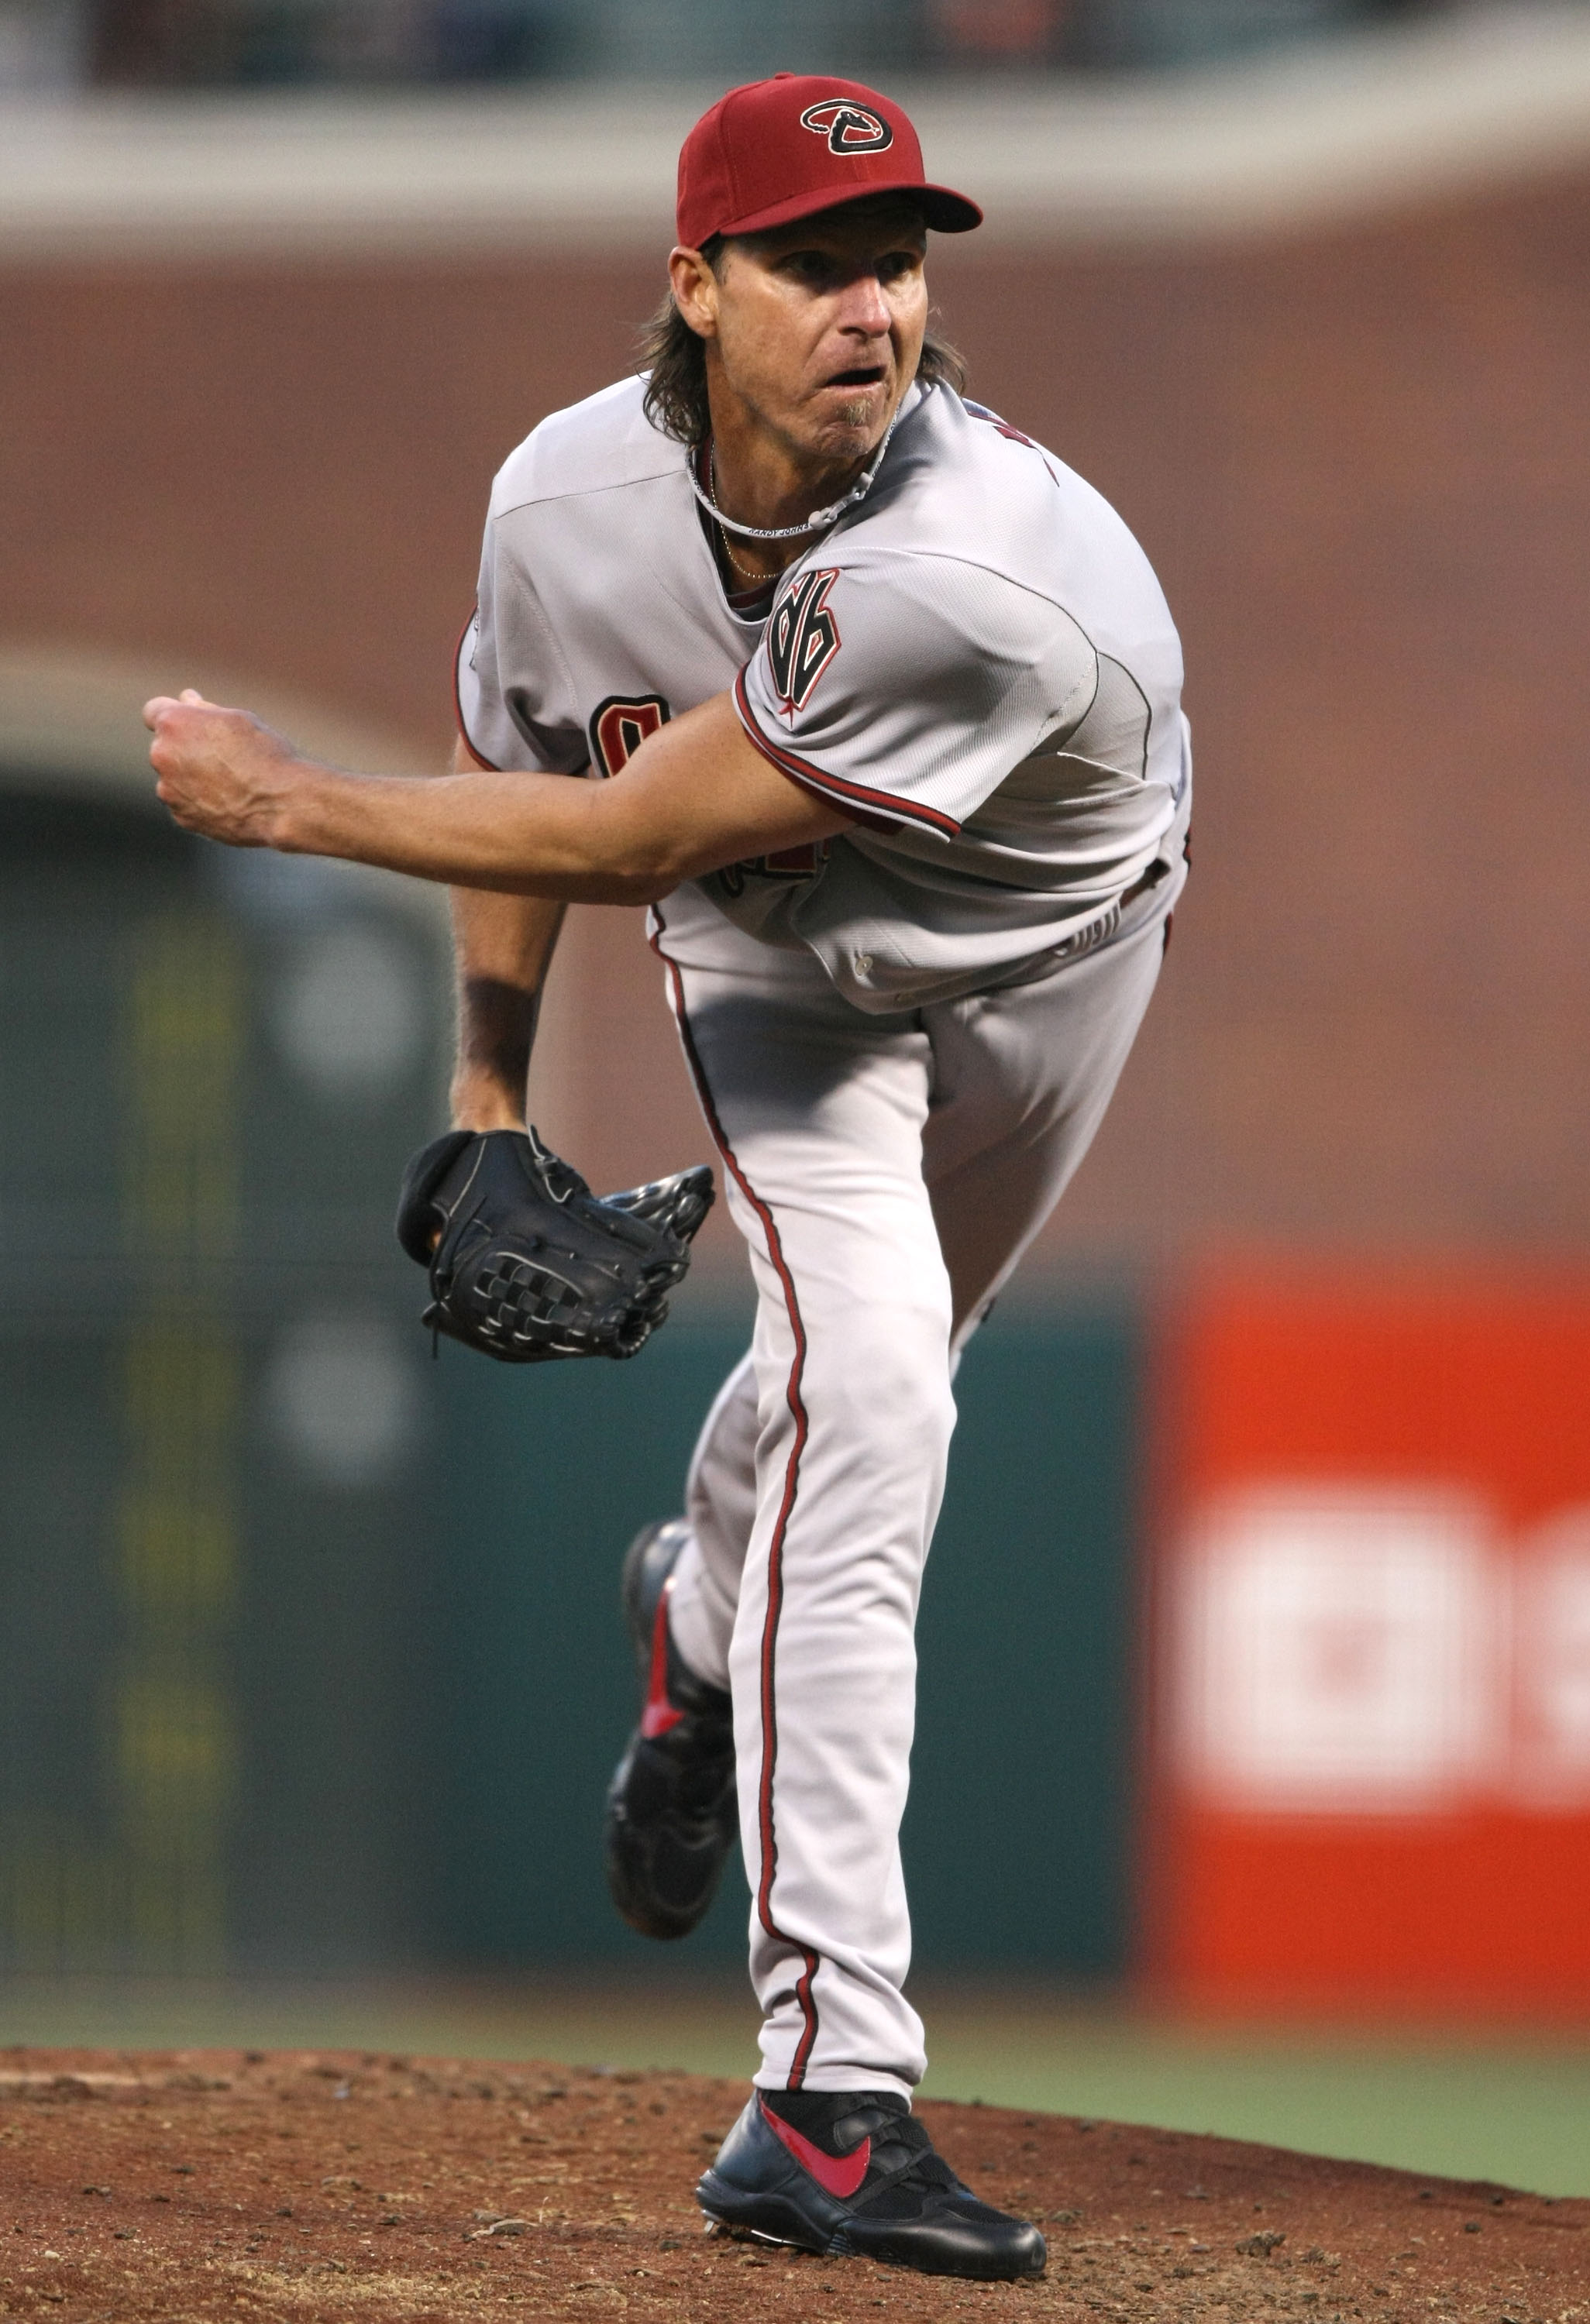 SAN FRANCISCO - APRIL 14:  Randy Johnson #51 of the Arizona Diamondbacks pitches against the San Francisco Giants during a Major League Baseball game on March 14, 2008 at AT&T Park in San Francisco, California.  (Photo by Jed Jacobsohn/Getty Images)